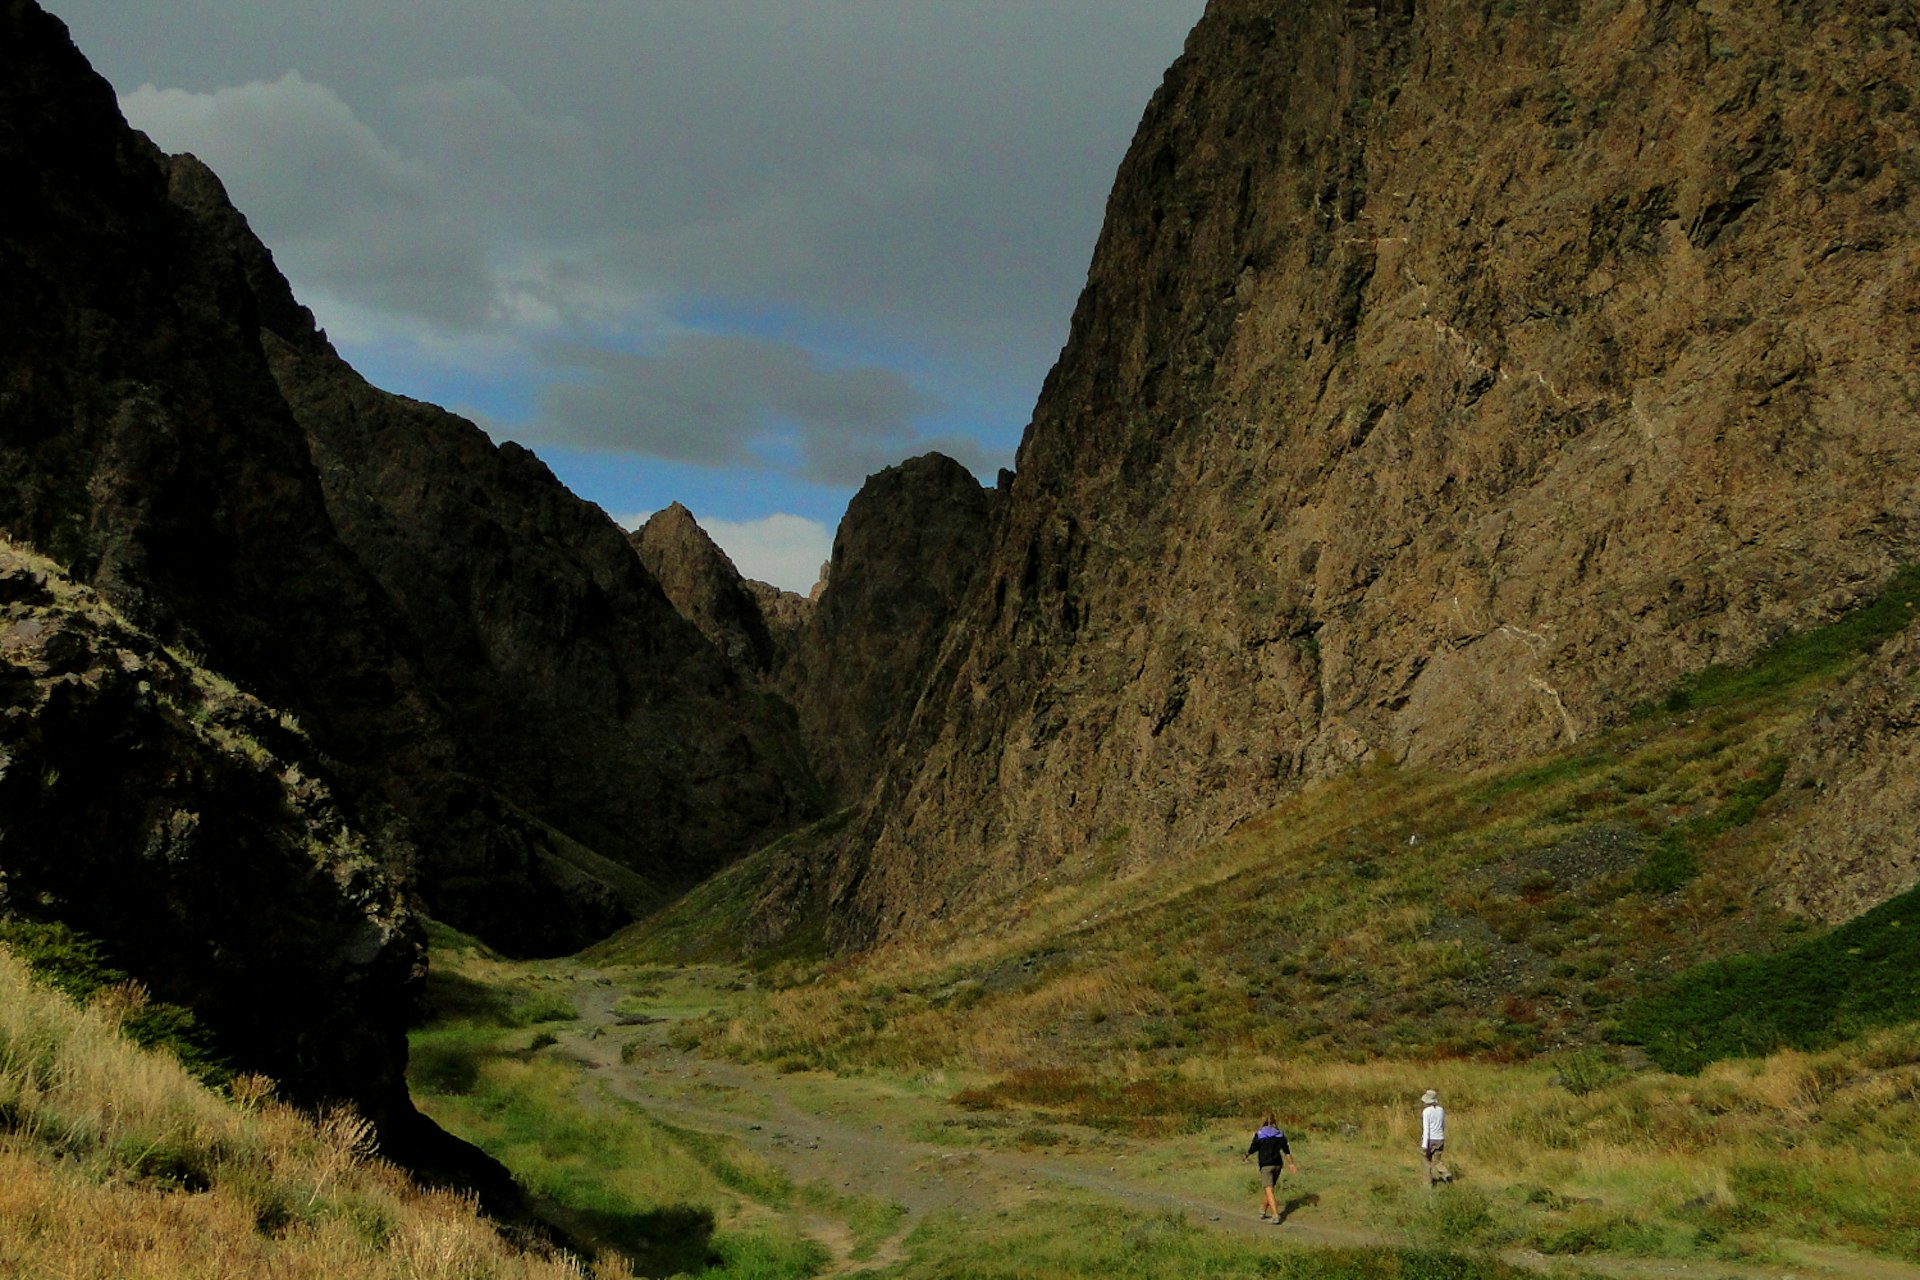 First stop: the craggy canyons of Yolyn Am. Image by Stephen Lioy / Lonely Planet